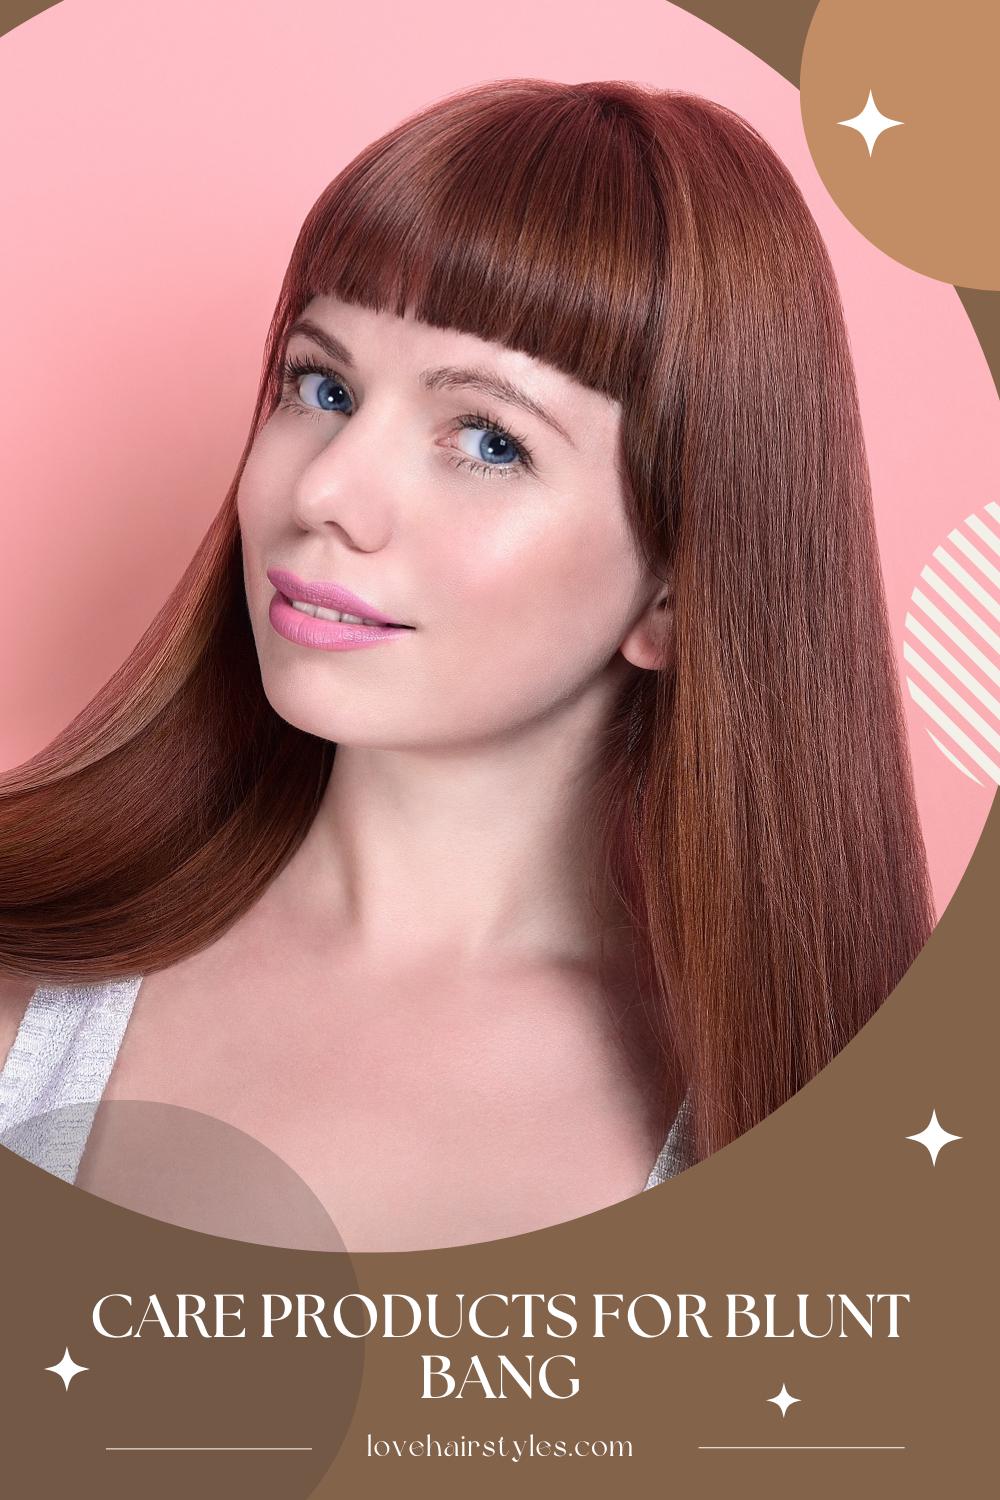 Shampoo and Care Products For Blunt Bang